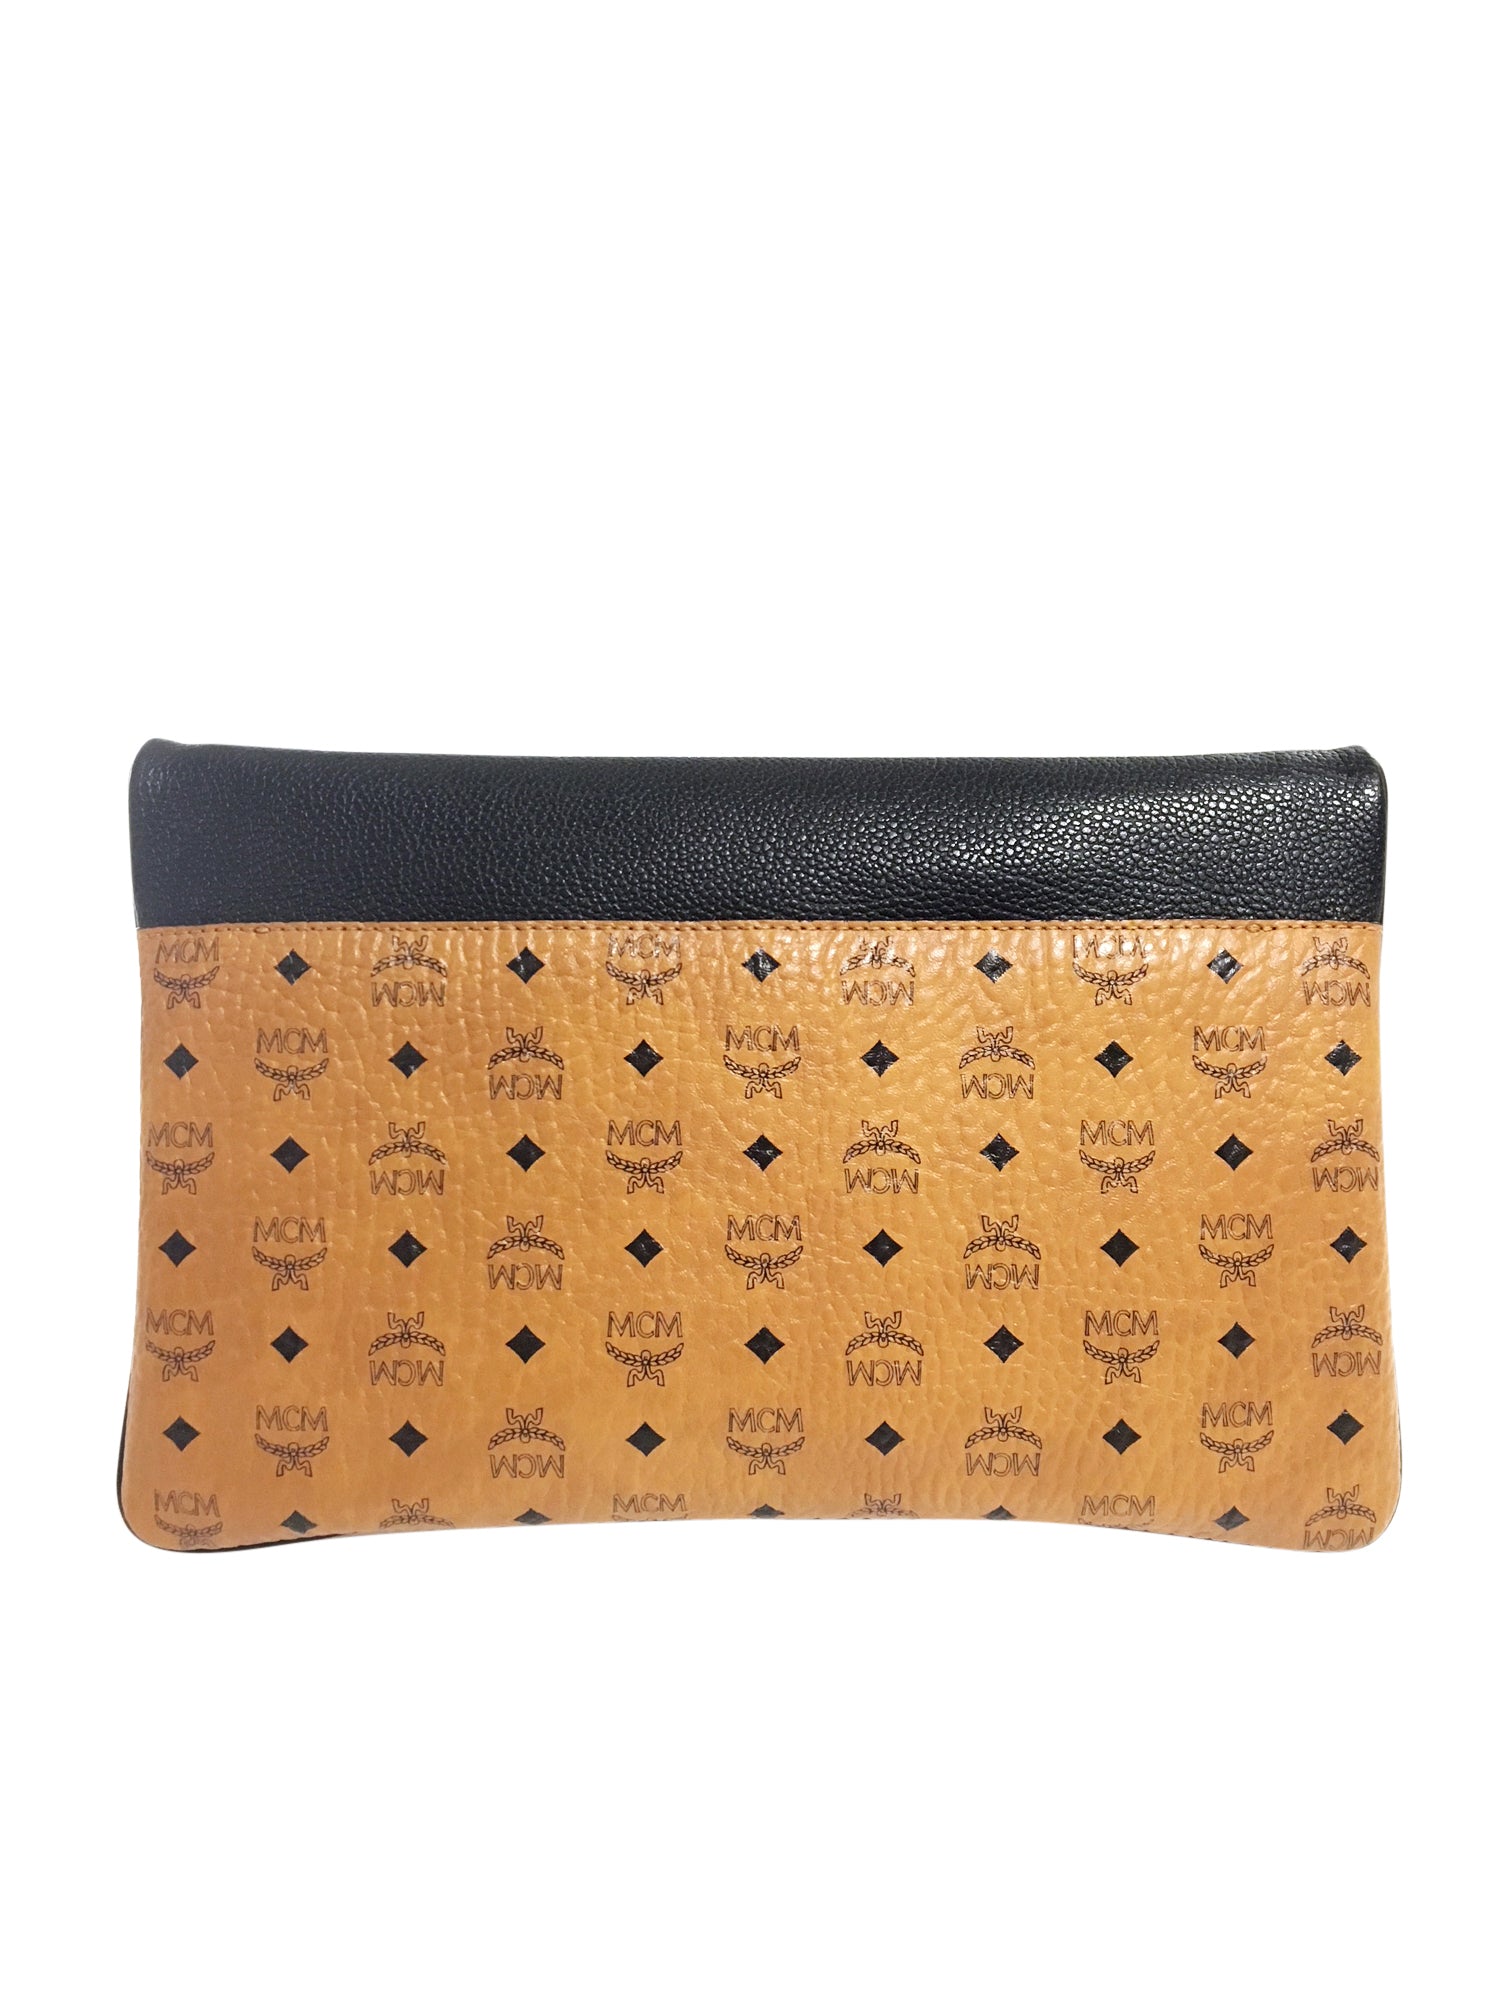 MCM Clutch - aptiques by Authentic PreOwned